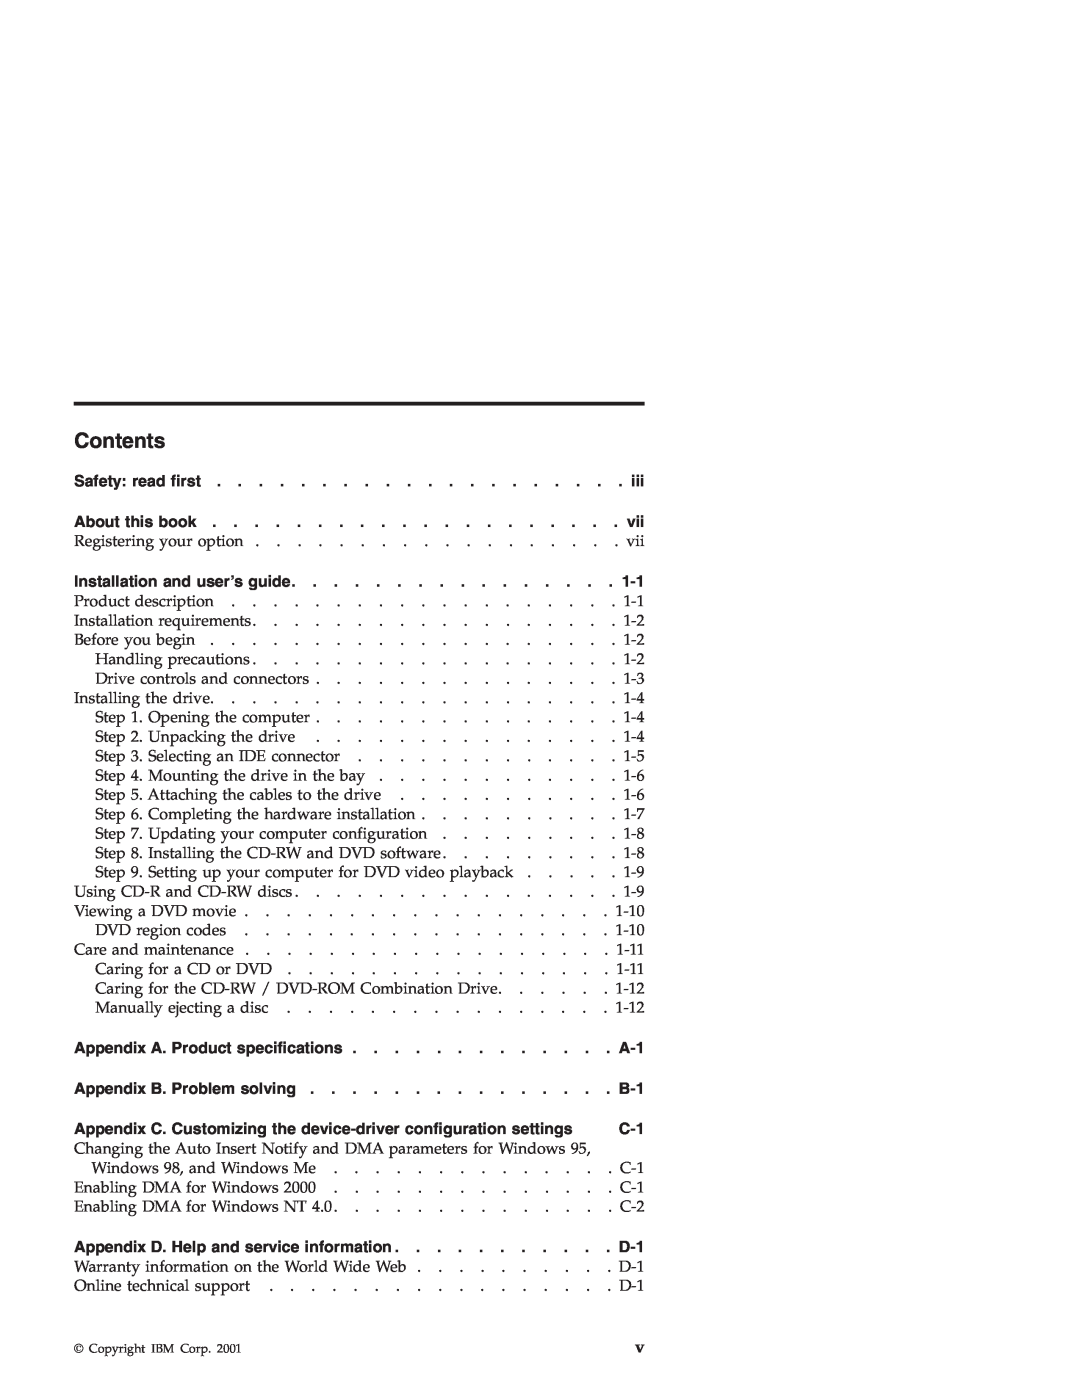 IBM 22P6959 manual Contents, Registering your option 